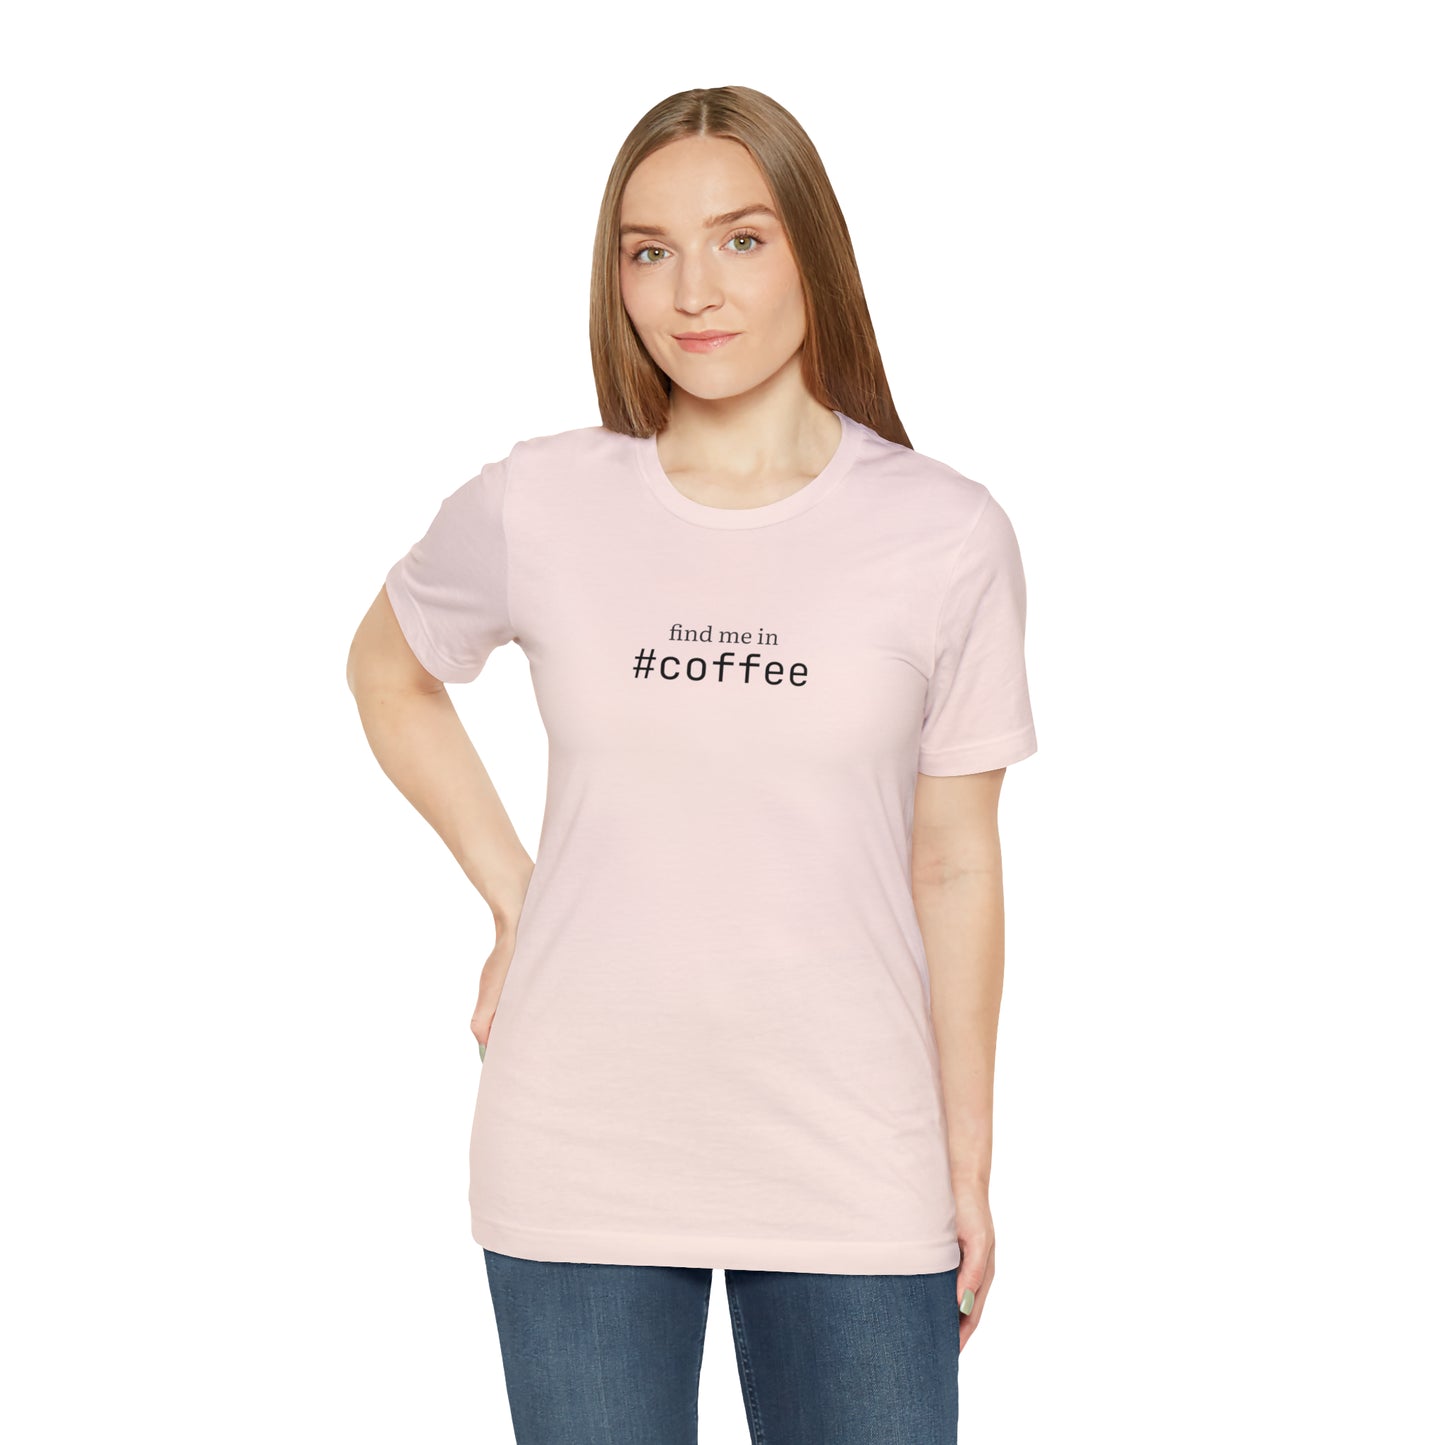 Find me in #coffee T-Shirt